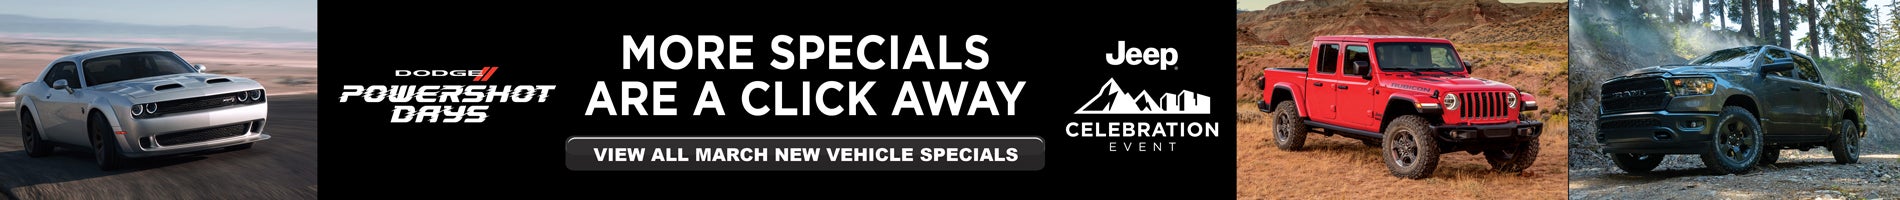 View All New Vehicle Specials